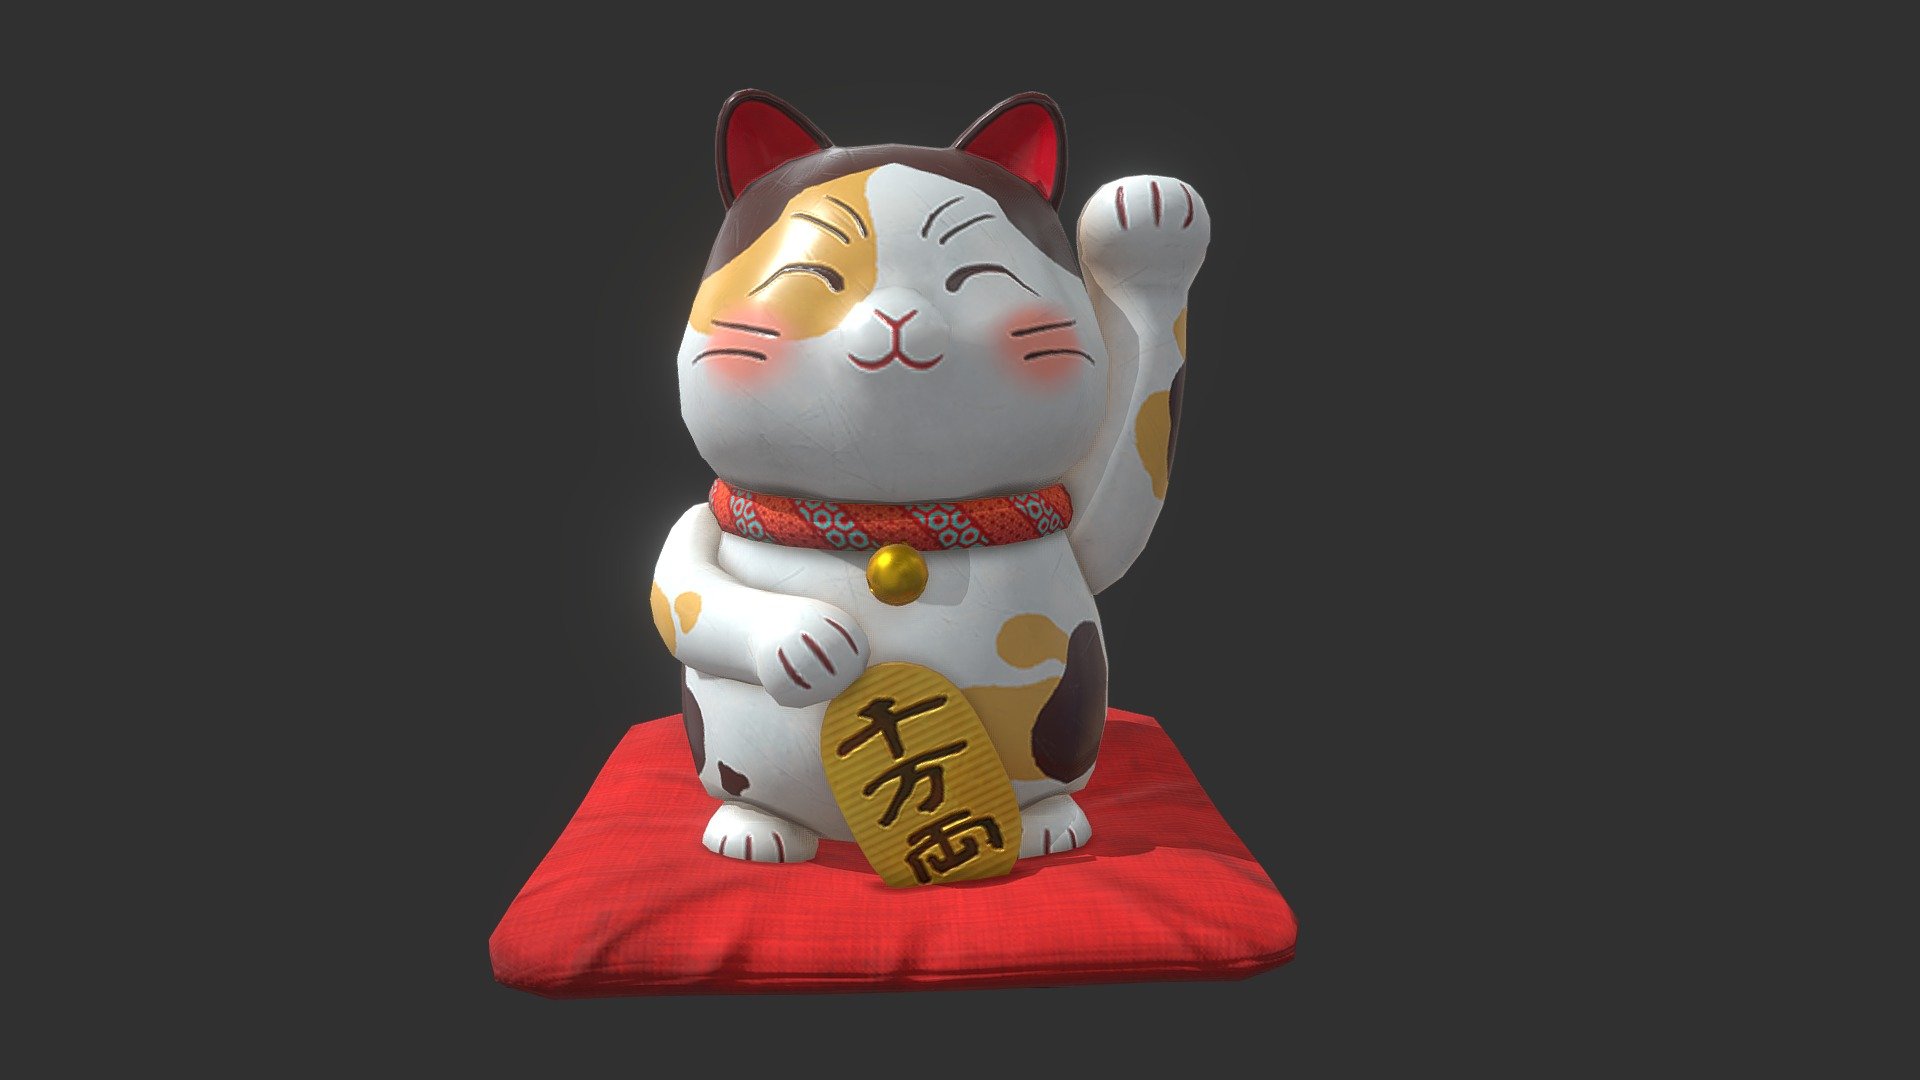 Originally modelled in MAYA. Detailed enough for close-up renders.



Features:



-UV unfolded.

-PBR texturing.

-All materials, textures are included.

-No special plug-in needed to open scene.

Animation preview here:

https://youtu.be/fRcaBFwXKHU - Lucky Cat - Buy Royalty Free 3D model by JoyTsai 3d model